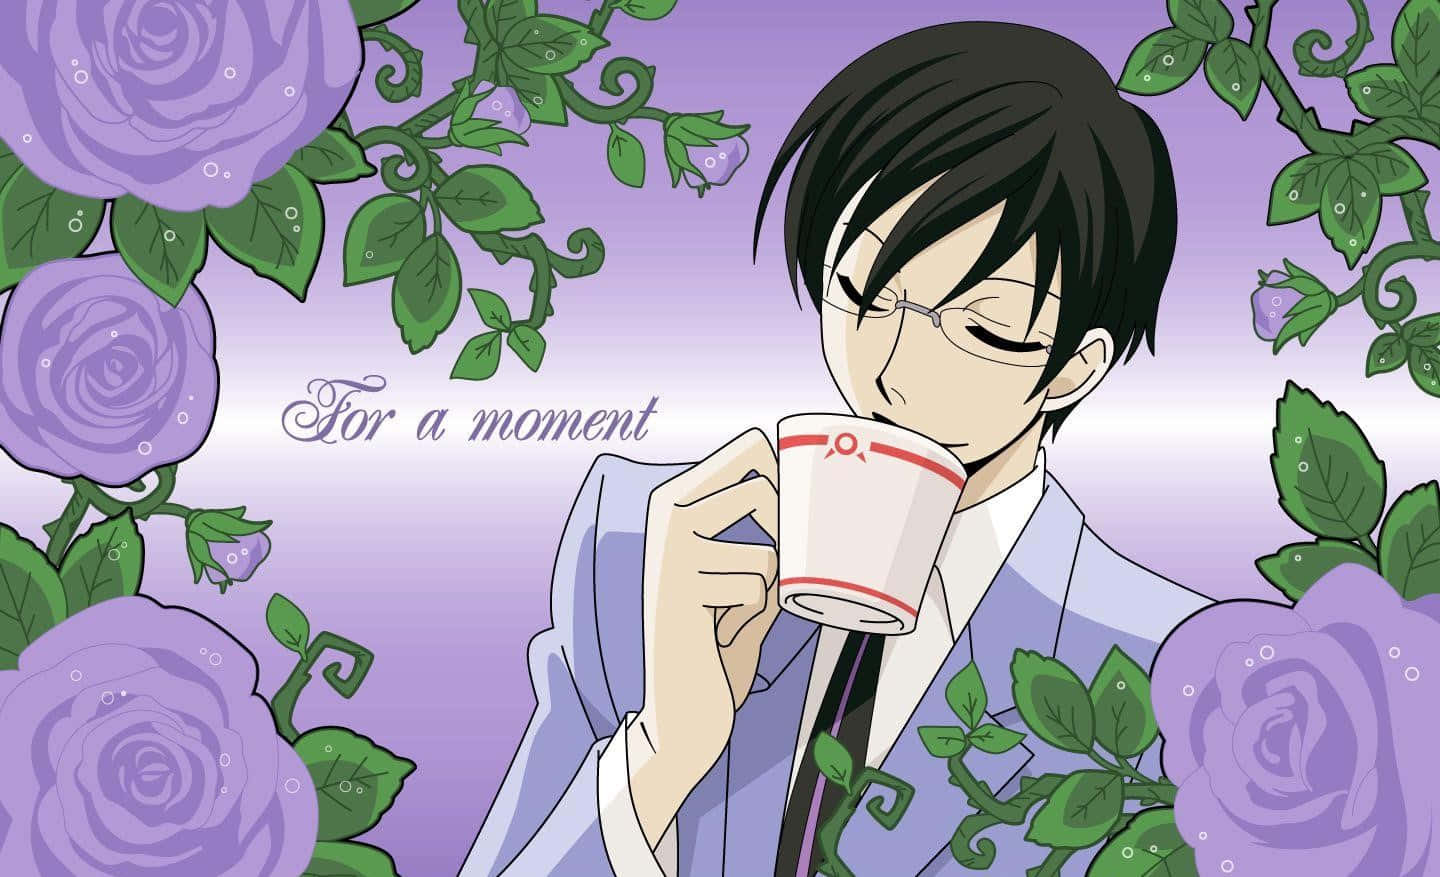 Anime & Manga 4 All: Quotes From The Hitachiin Twins, Ouran High School  Host Club